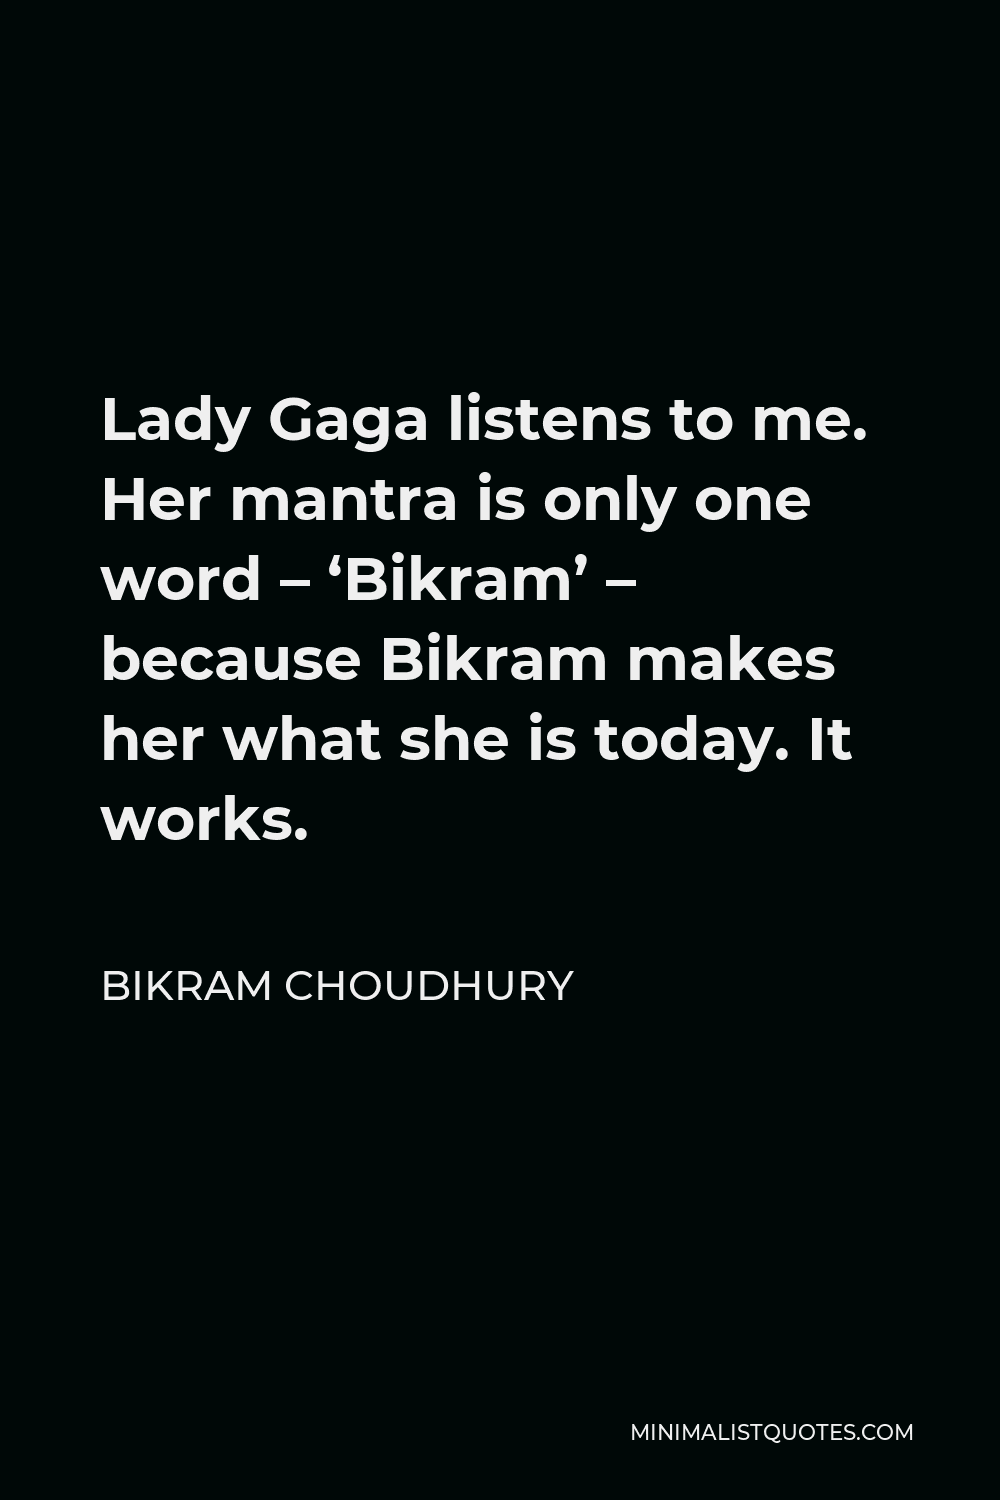 Bikram Choudhury Quote - Lady Gaga listens to me. Her mantra is only one word – ‘Bikram’ – because Bikram makes her what she is today. It works.